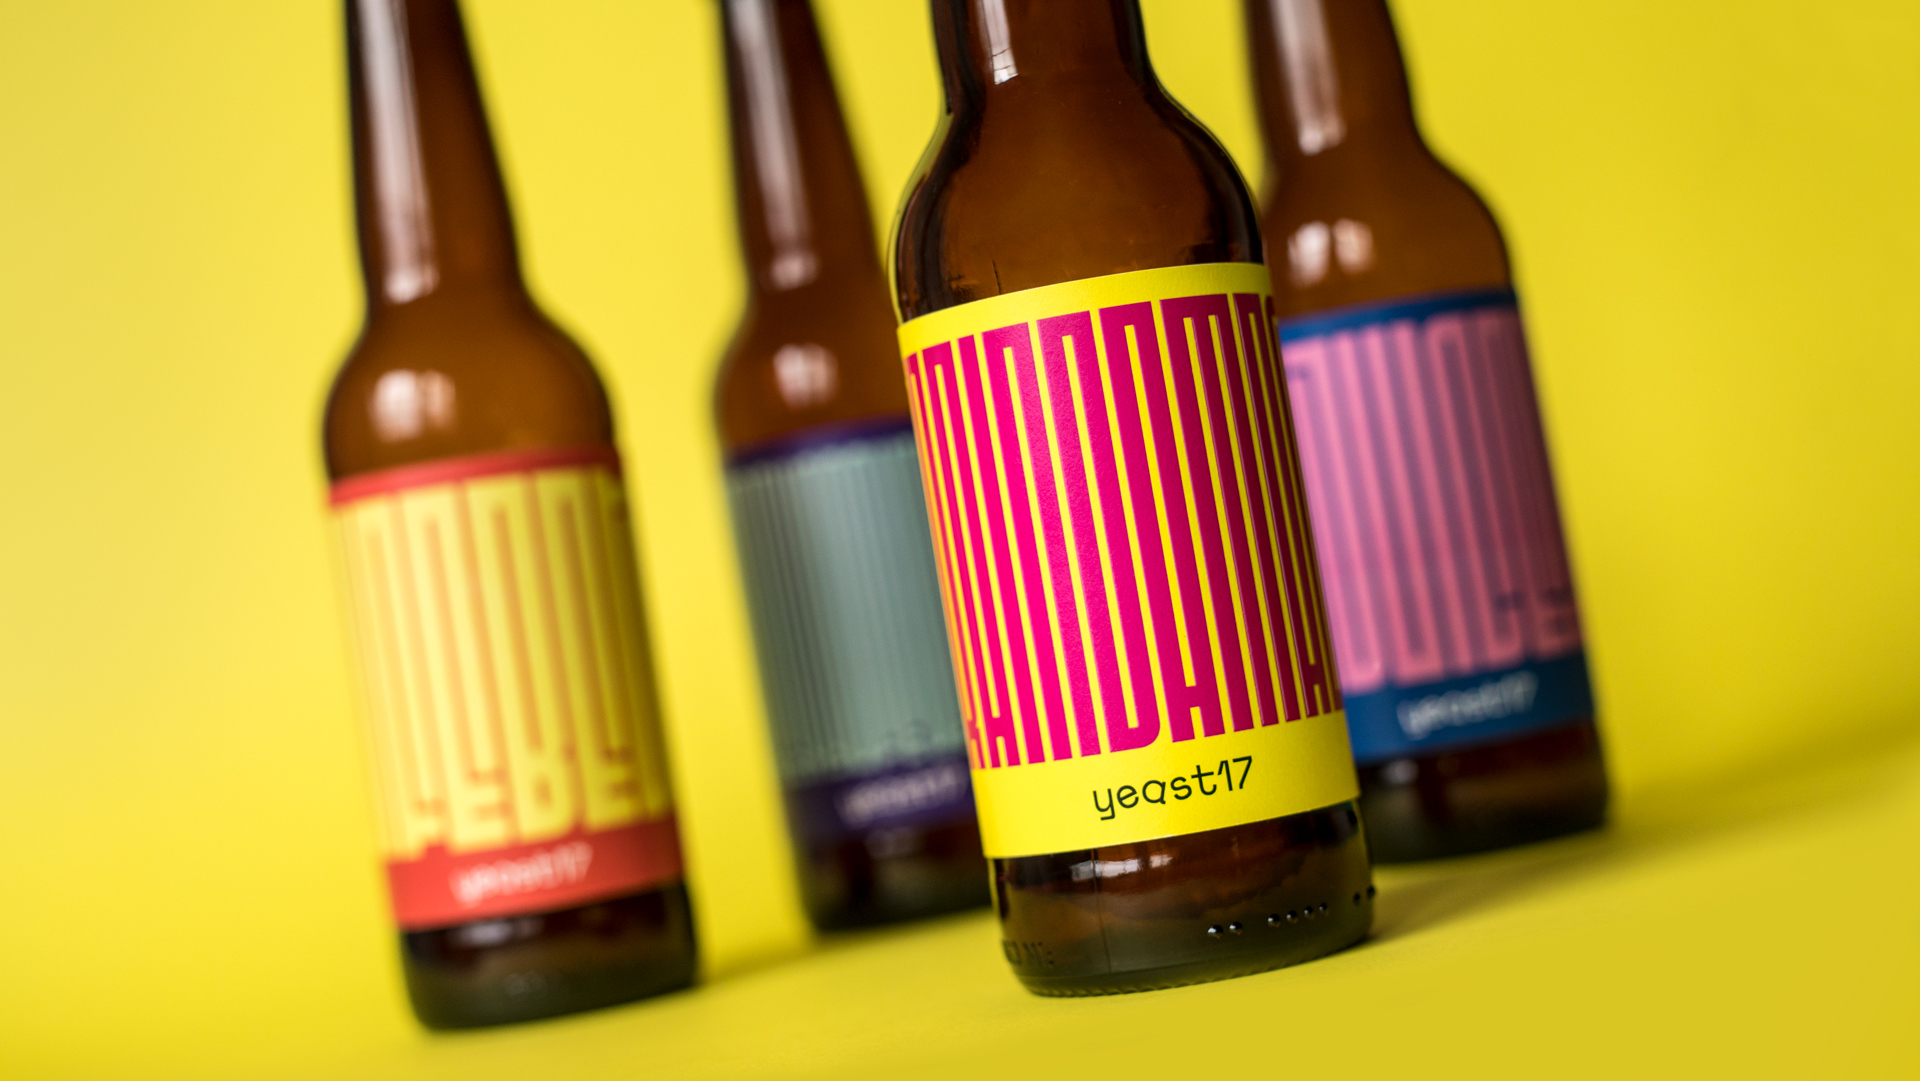 Concept New Brand and Packaging Design for the Micro-Brewery